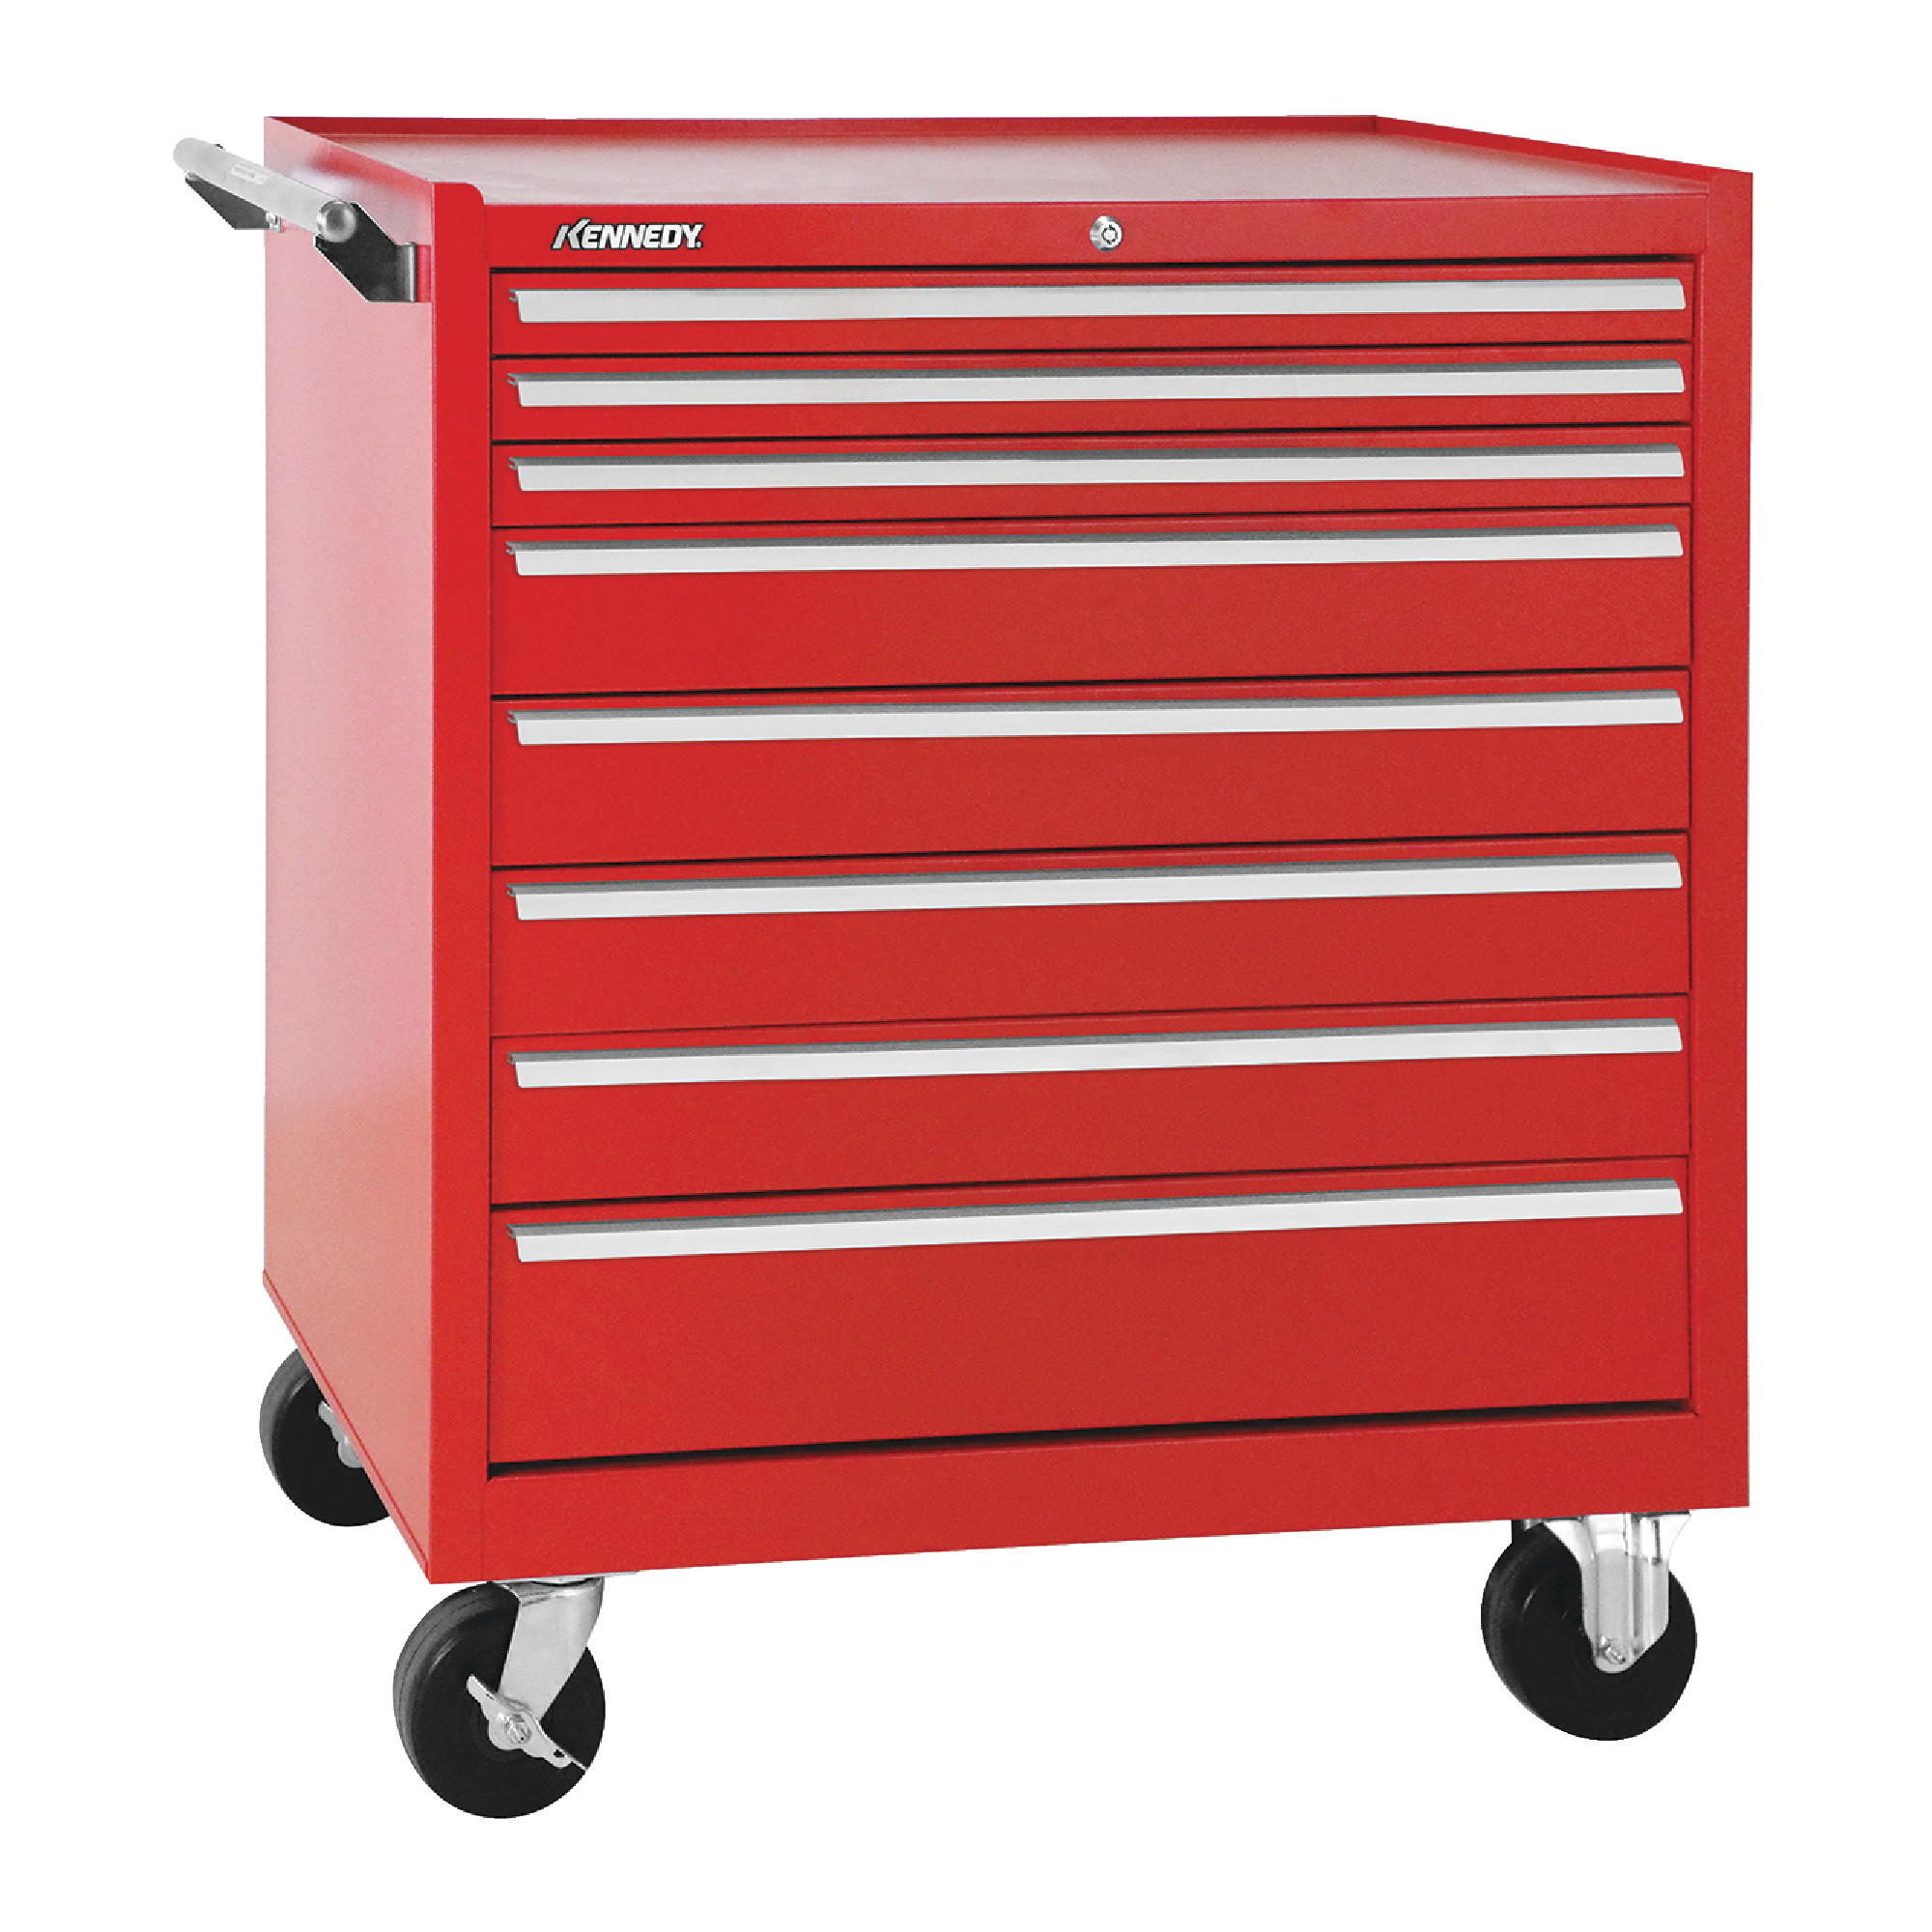 KENNEDY 8 Drawer Roller Cabinet With Ball Bearing Slides